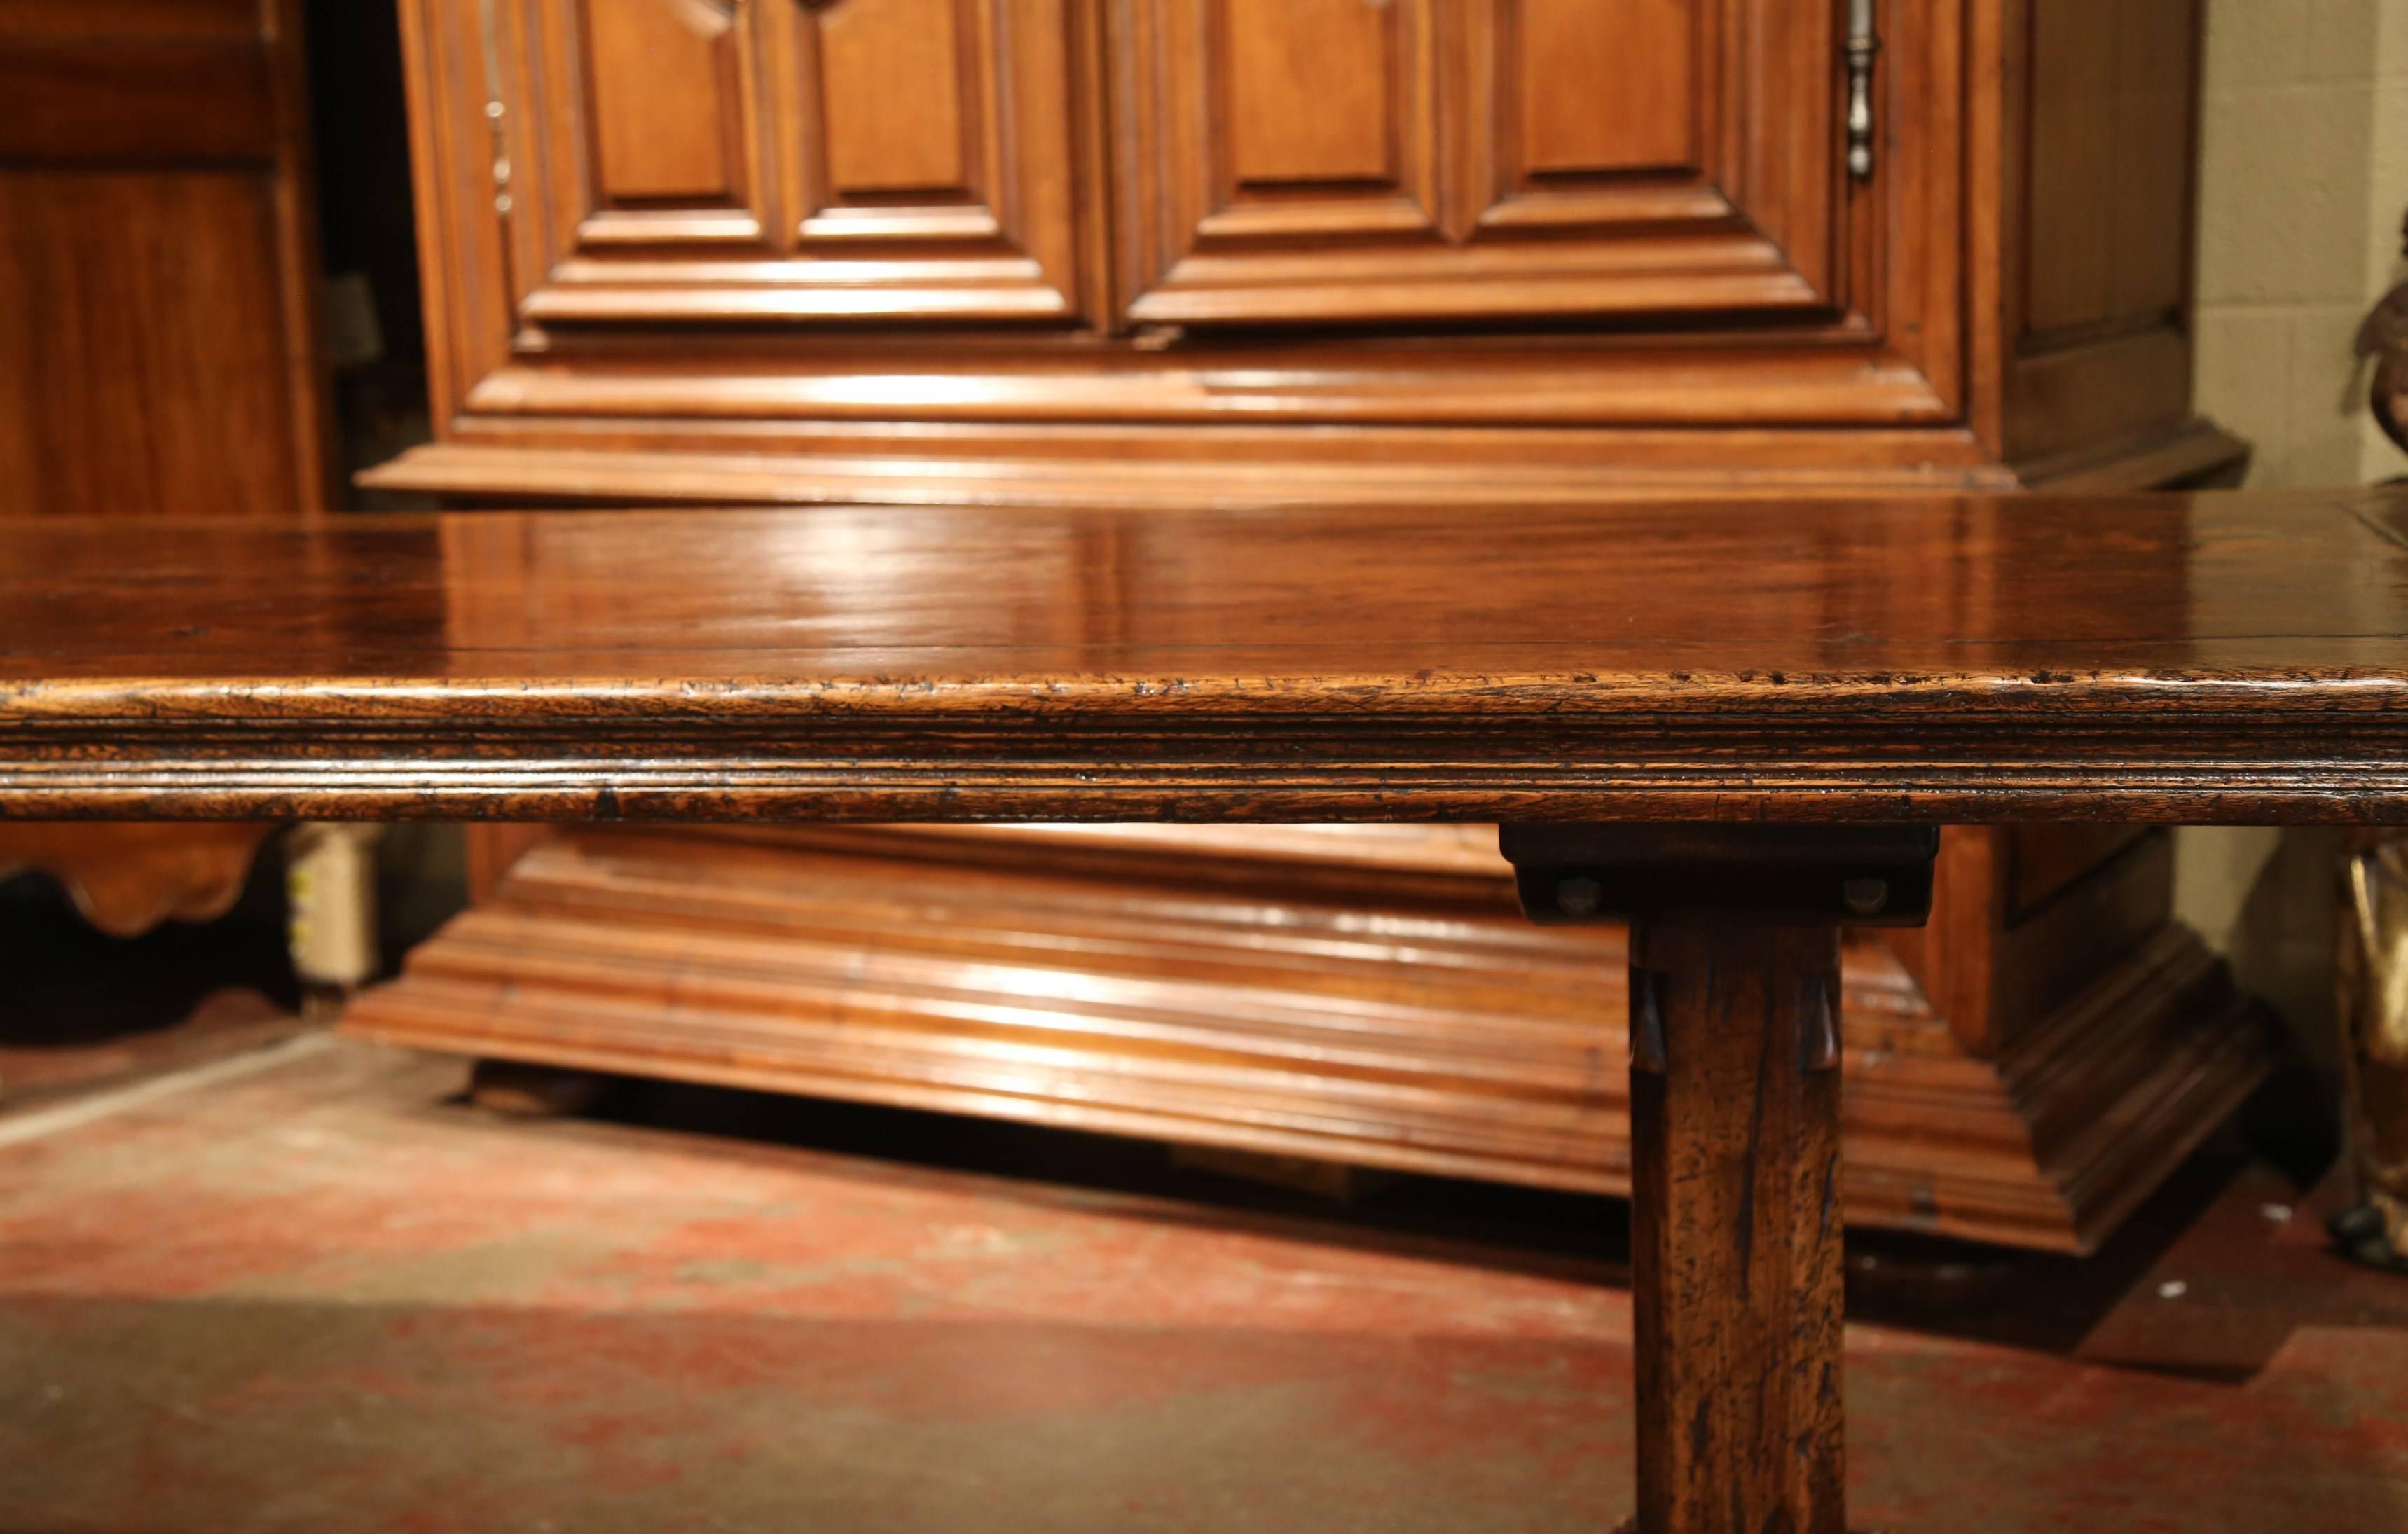 Louis XIII French Carved Chestnut and Oak Trestle Dining Table from the Pyrenees (20. Jahrhundert)